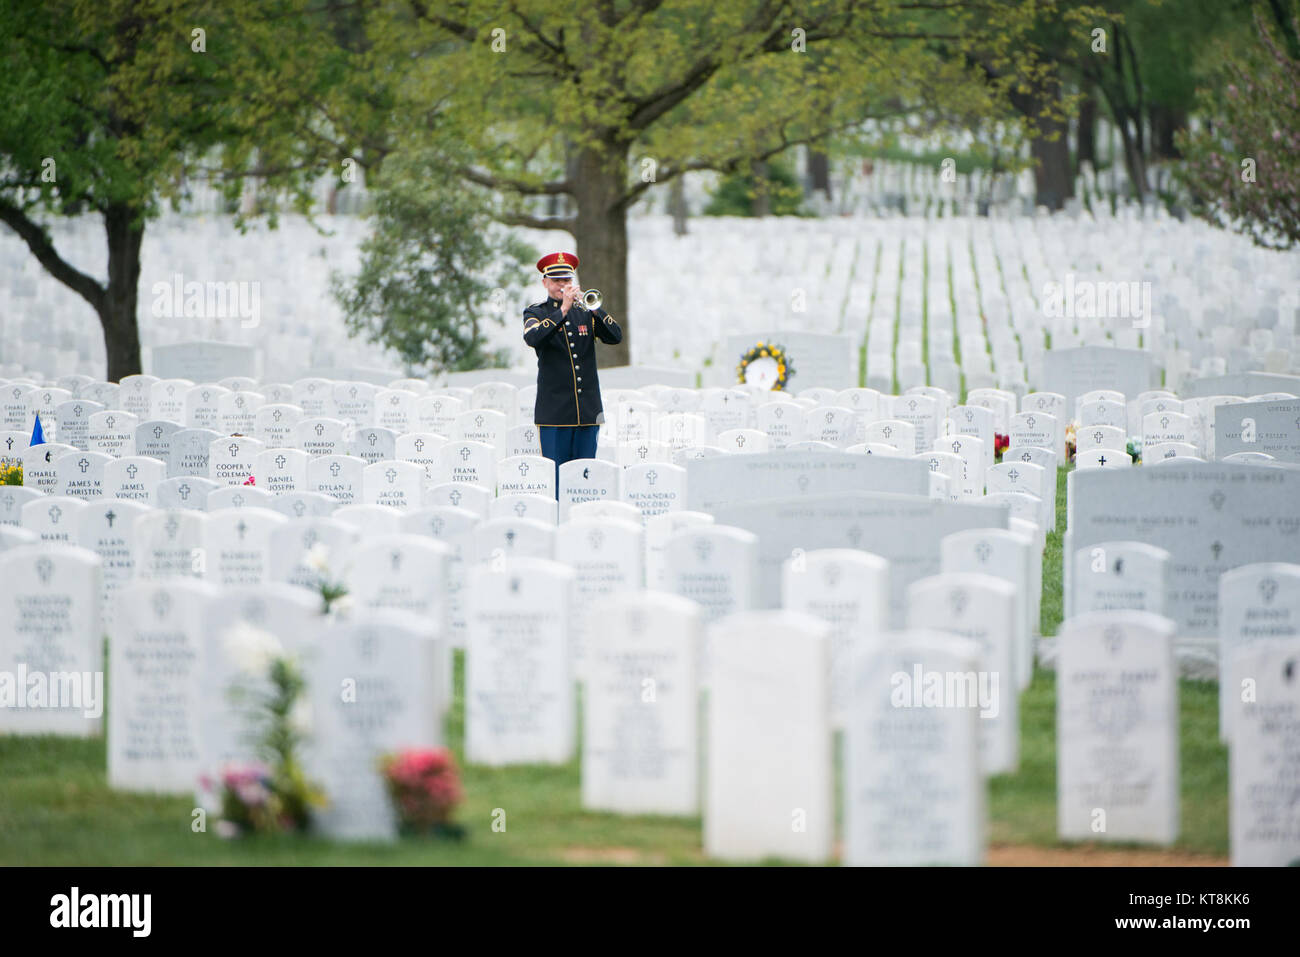 A member of the U.S. Army Band “Pershing’s Own,” plays Taps during the graveside service for her cousin U.S. Army Air Forces 2nd Lt. Marvin B. Rothman, 21, of Cleveland Heights, Ohio, at Arlington National Cemetery, April 19, 2017, in Arlington, Va. Rothman went missing during a bombing escort mission, April 11, 1944, flying a P-47D Thunderbolt over New Guinea. His remains were recently found and identified. (U.S. Army photo by Rachel Larue/Arlington National Cemetery/released) Stock Photo